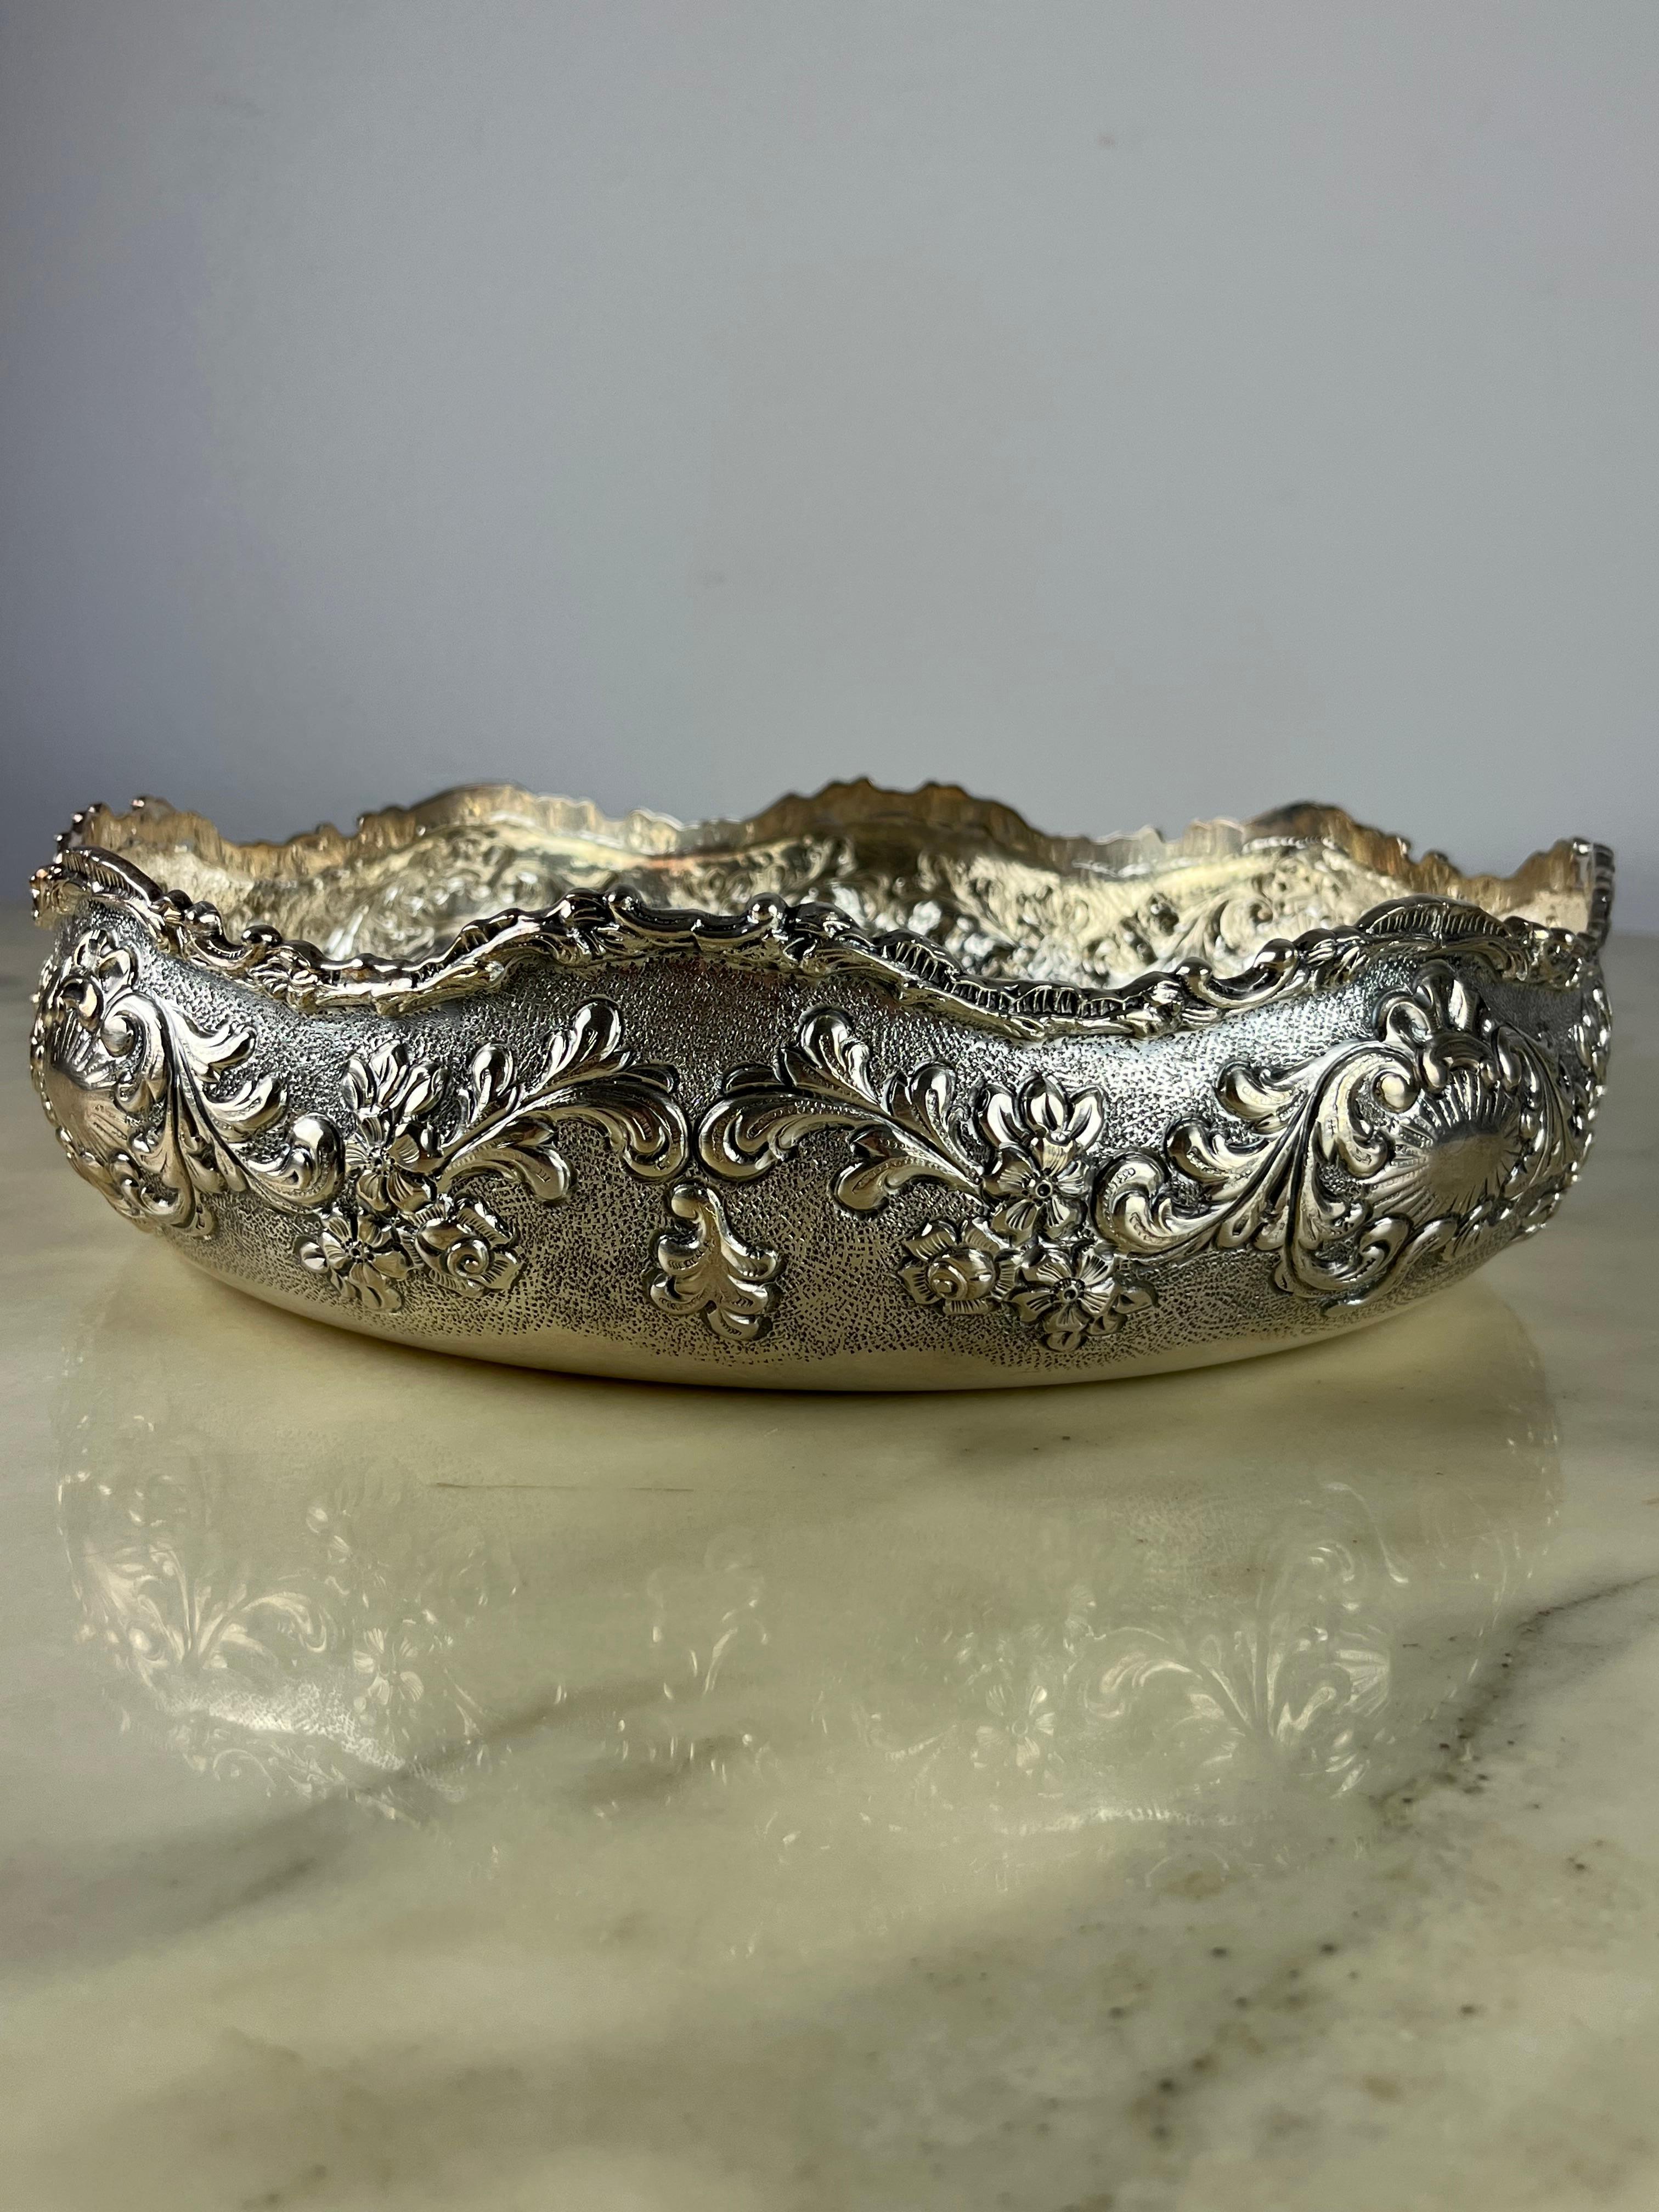 Handmade Centerpiece in 800 Silver, Italy, 1980s For Sale 3